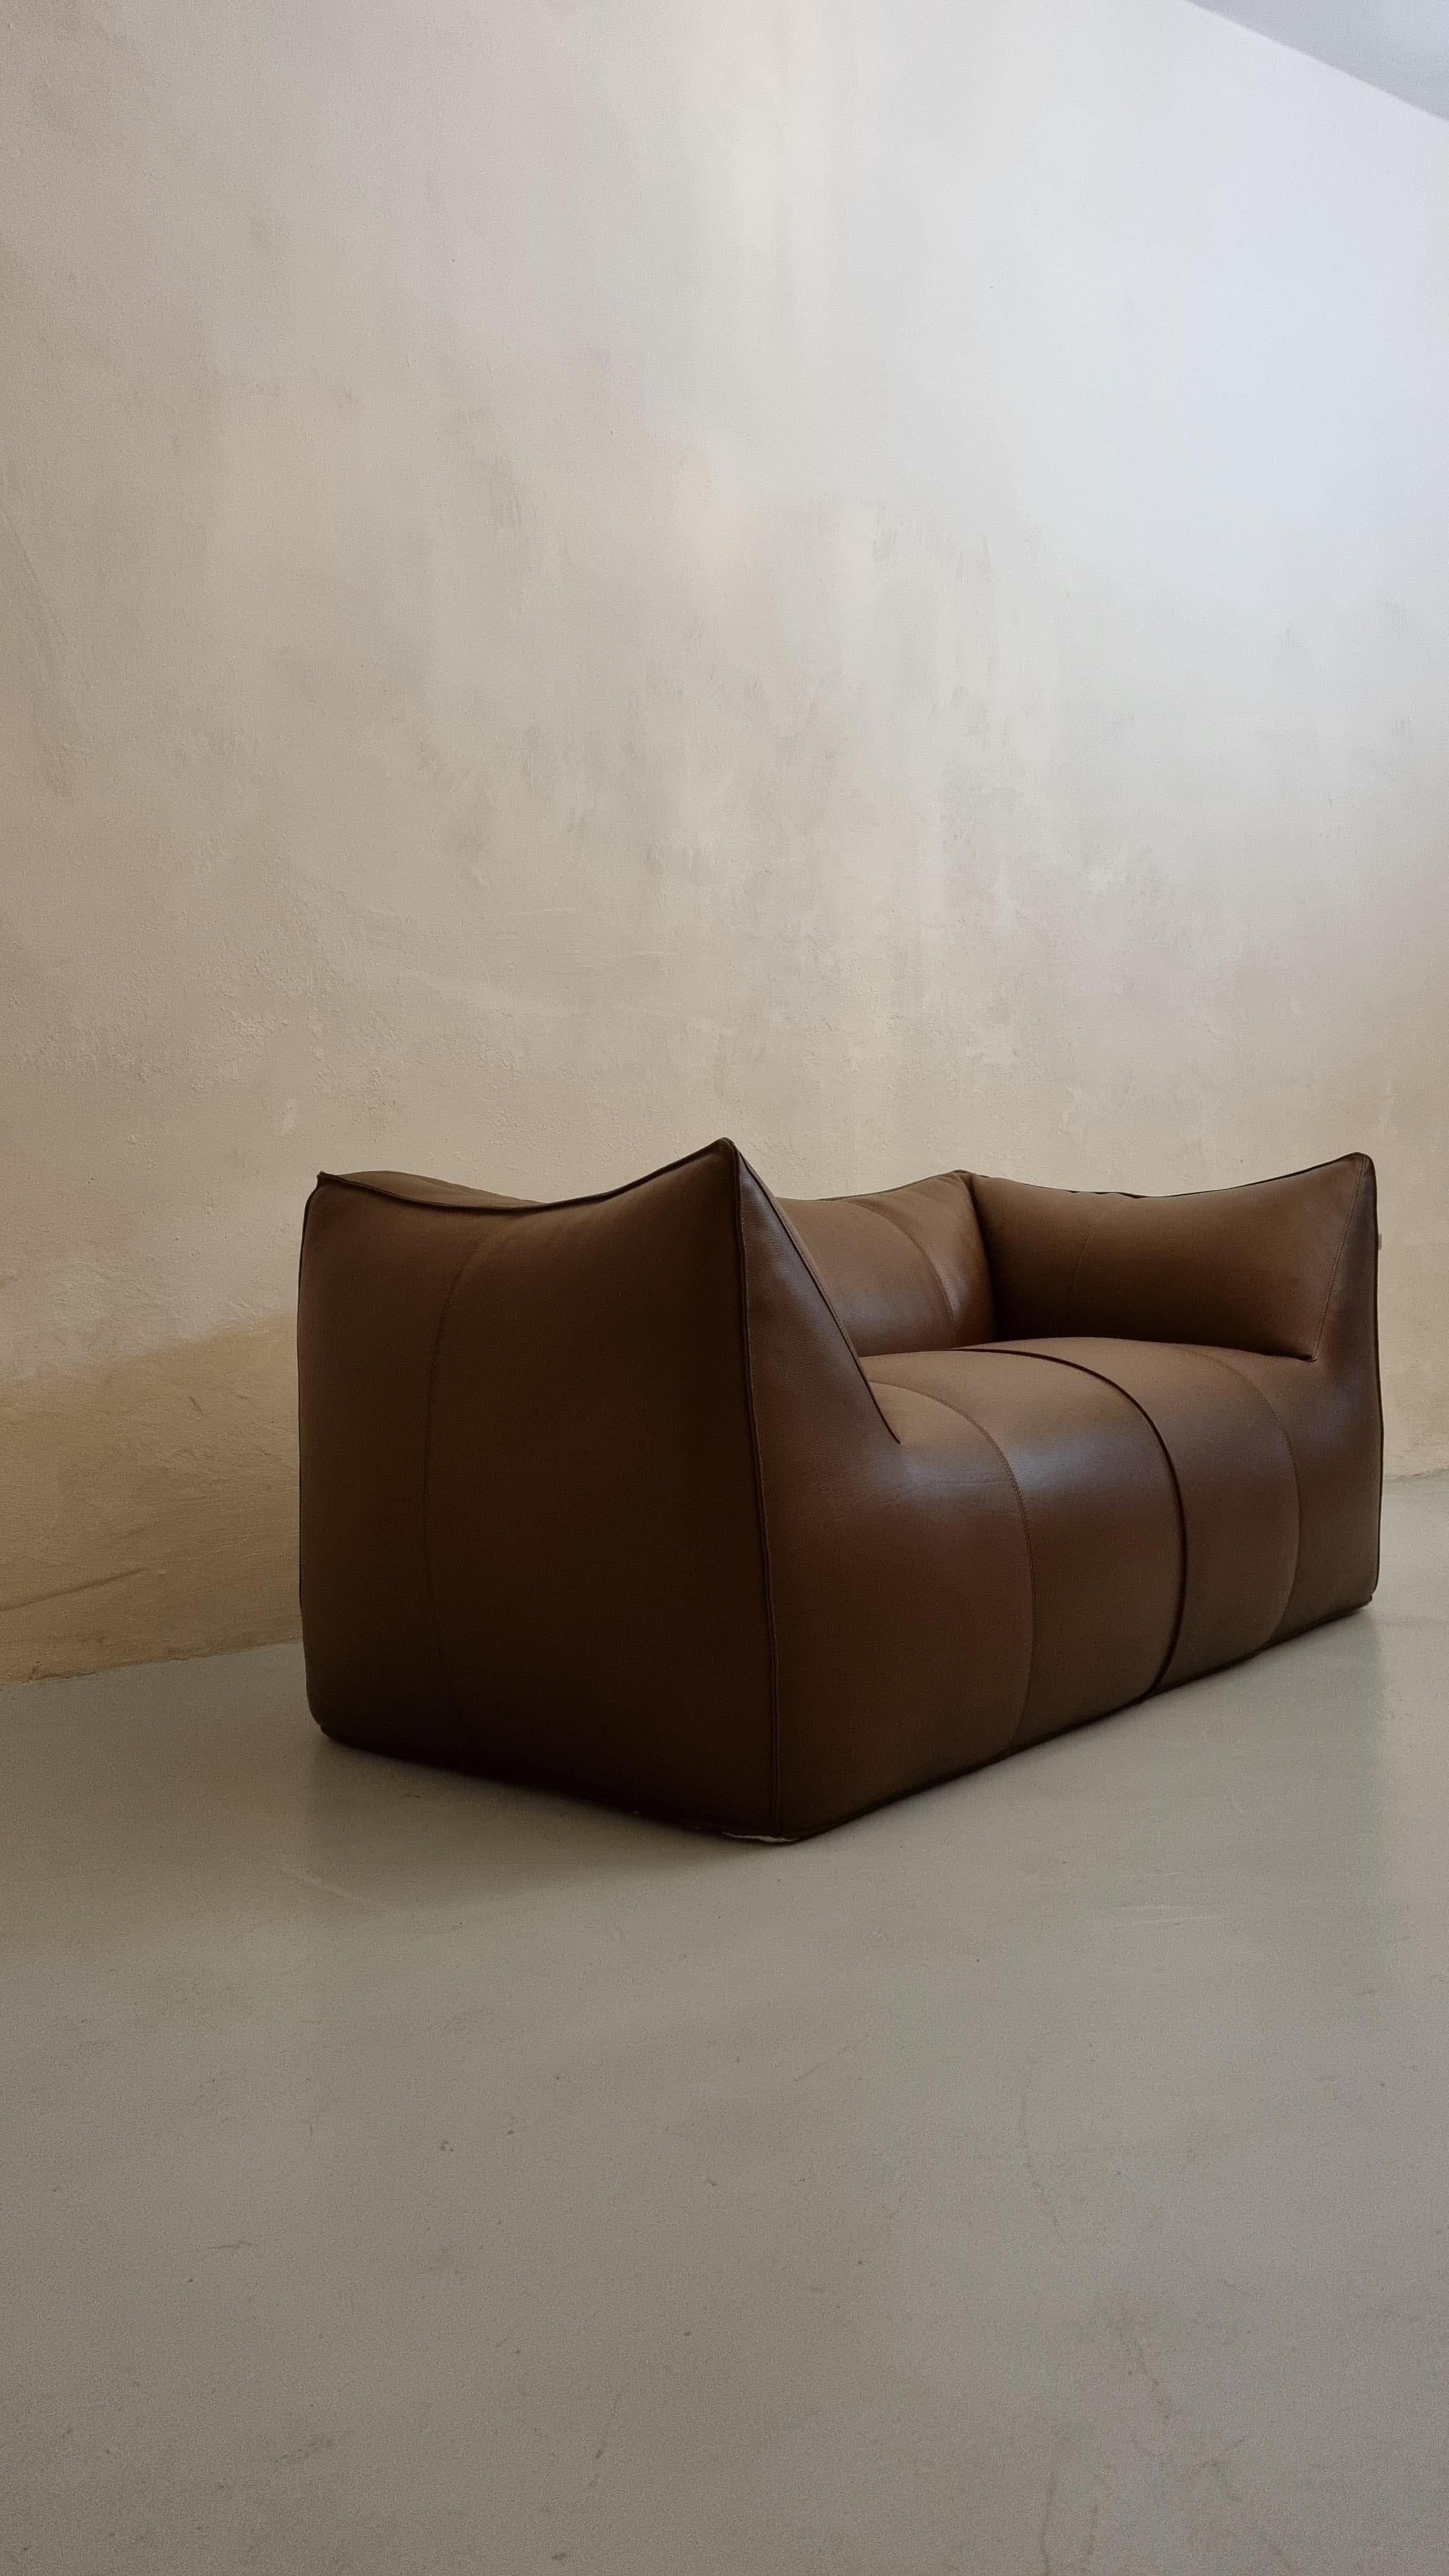 Le Bambole 2 seats sofa designed by Mario Bellini for B&b Italia , the Bambole series won the Compasso d'Oro award in 1979, reupholster in grained cowhide, Le Bambole is an iconic piece of Italian design.   included in the permanent collection of